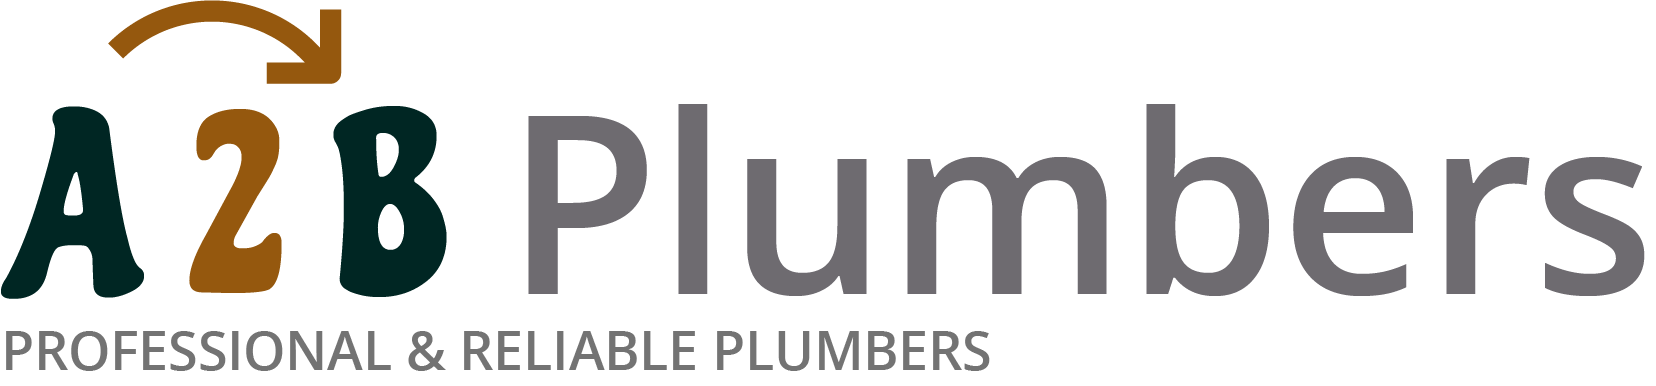 If you need a boiler installed, a radiator repaired or a leaking tap fixed, call us now - we provide services for properties in Dudley and the local area.